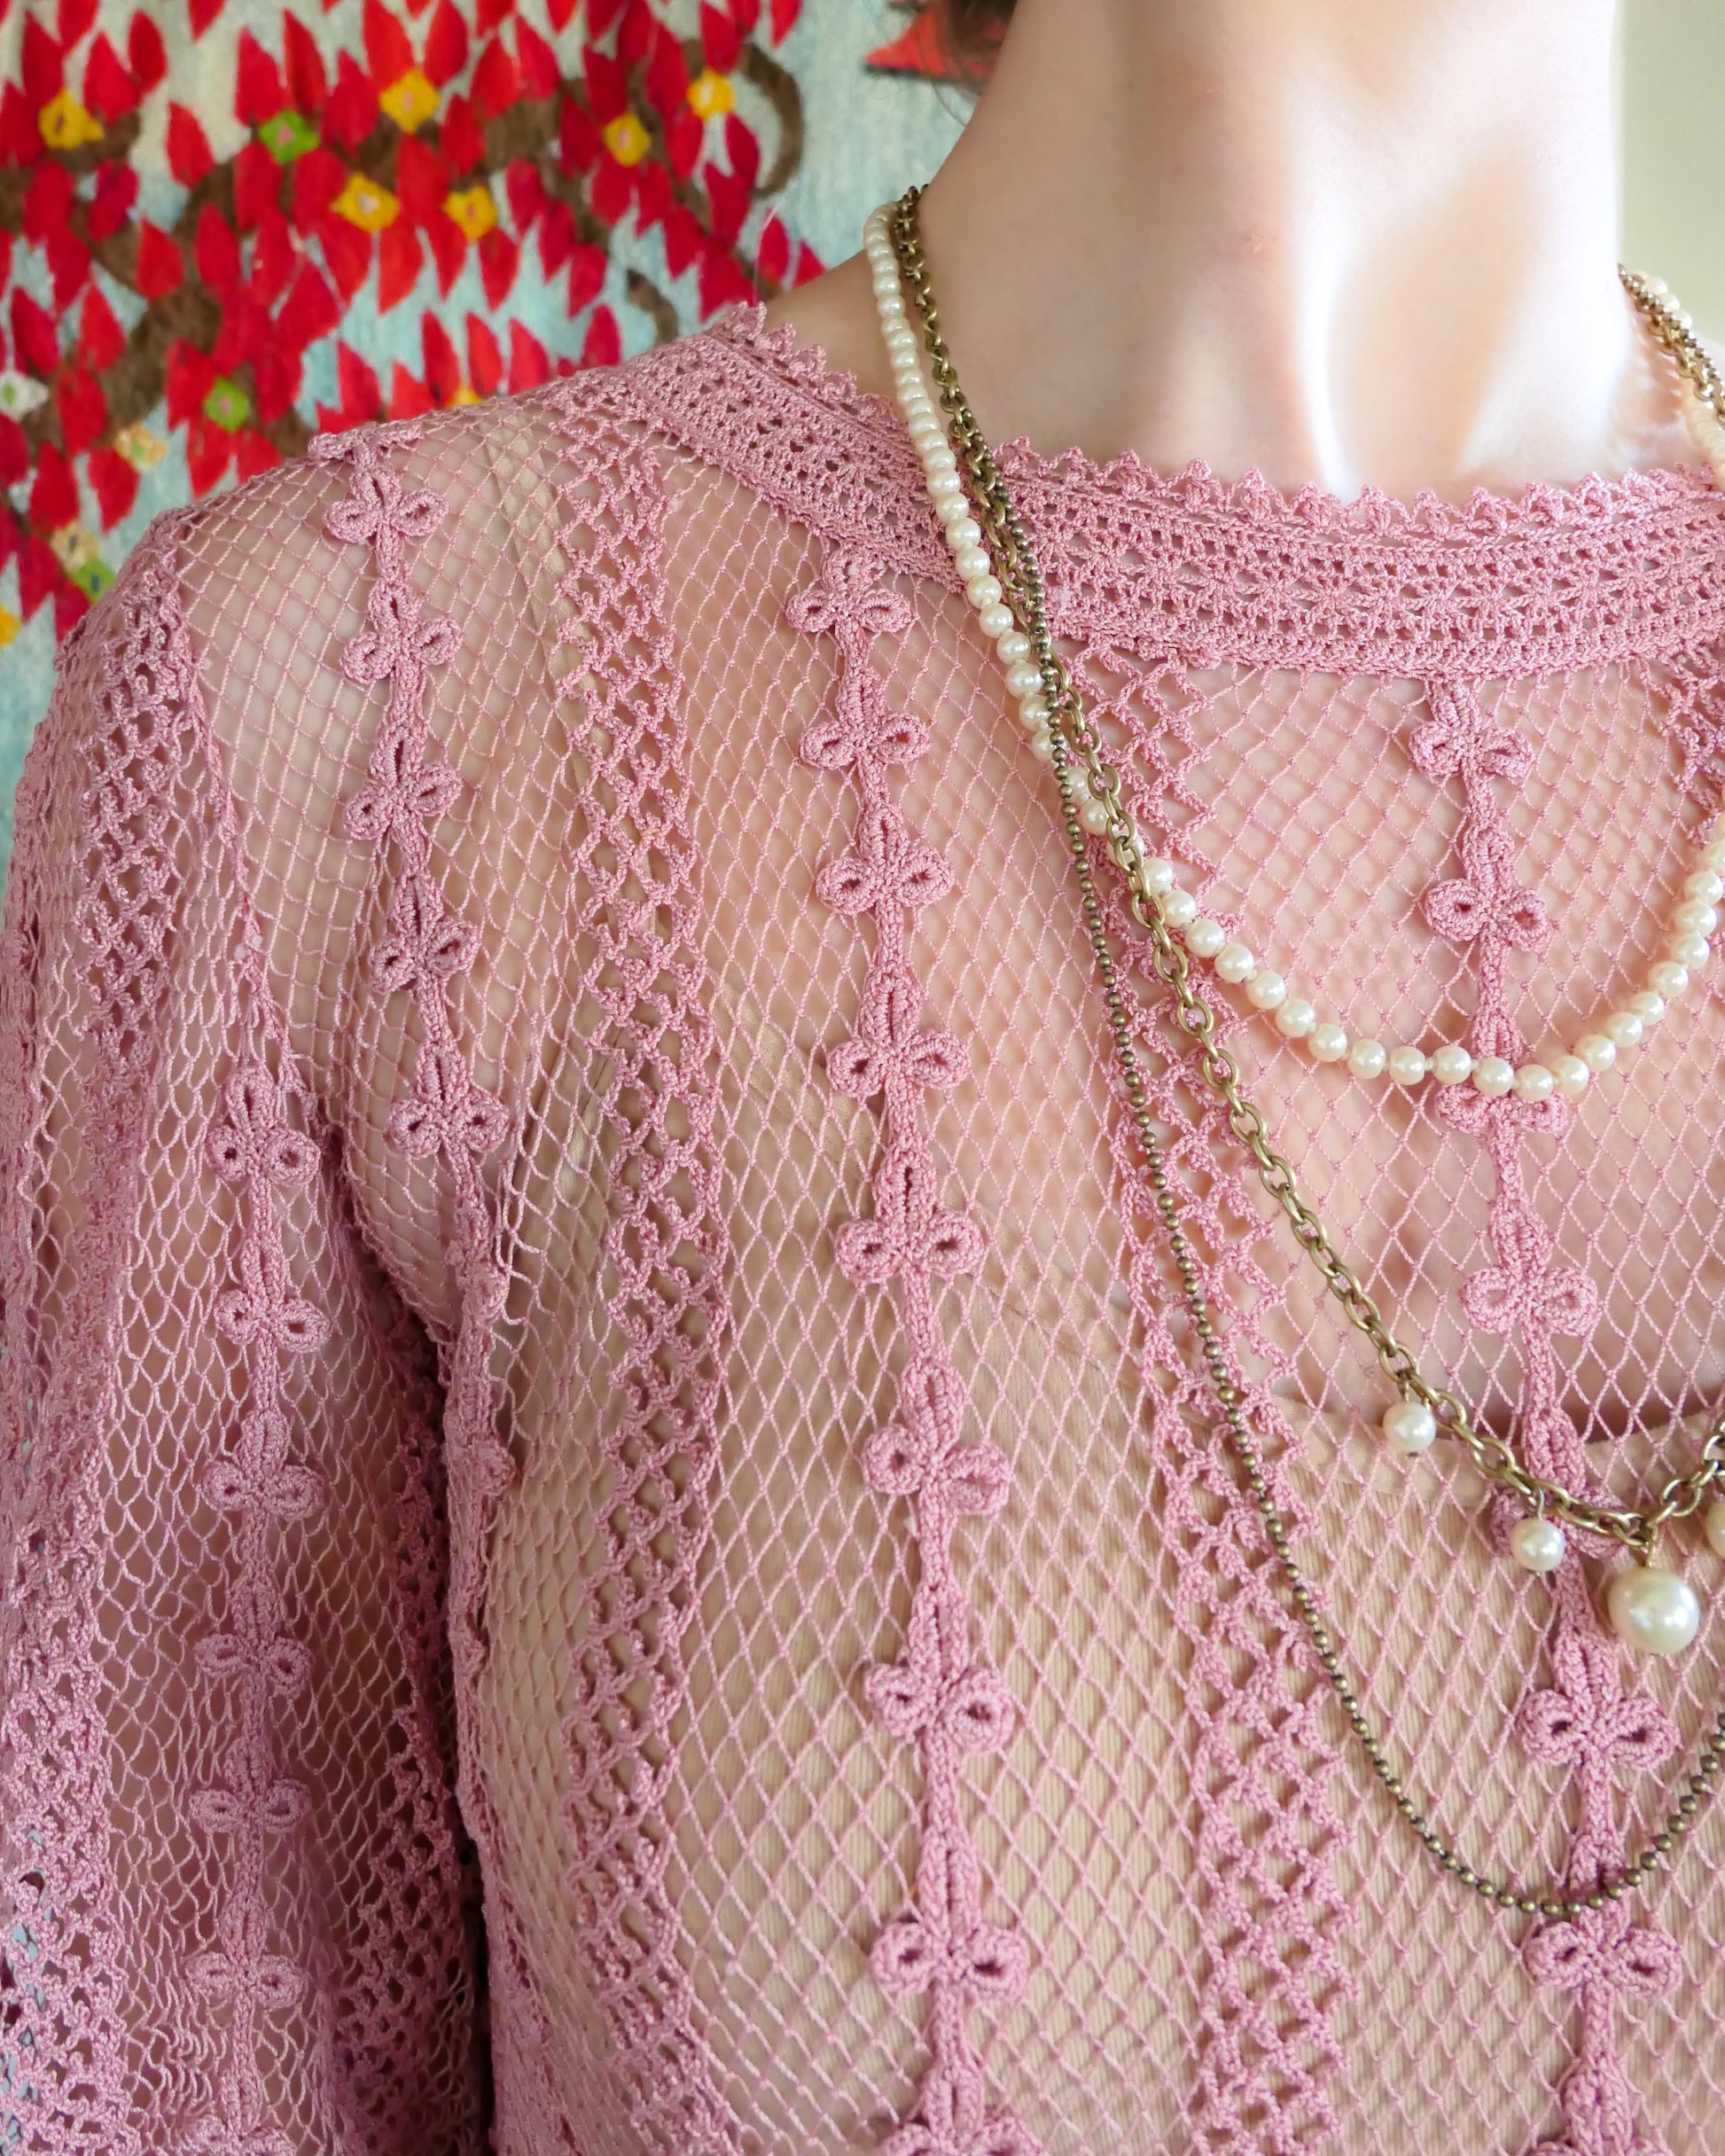 Closeup view of round neckline with detailed crochet trim.  One of our original Lim's crochet maxi dresses in a muted rose color from the 1980's. A darling of a piece and sure to turn heads, this dress was intricately hand crocheted using very fine cotton threads.   3/4 length sleeves, round collar, with ruffles at the wrist.  Model is wearing a natural colored slip underneath. 